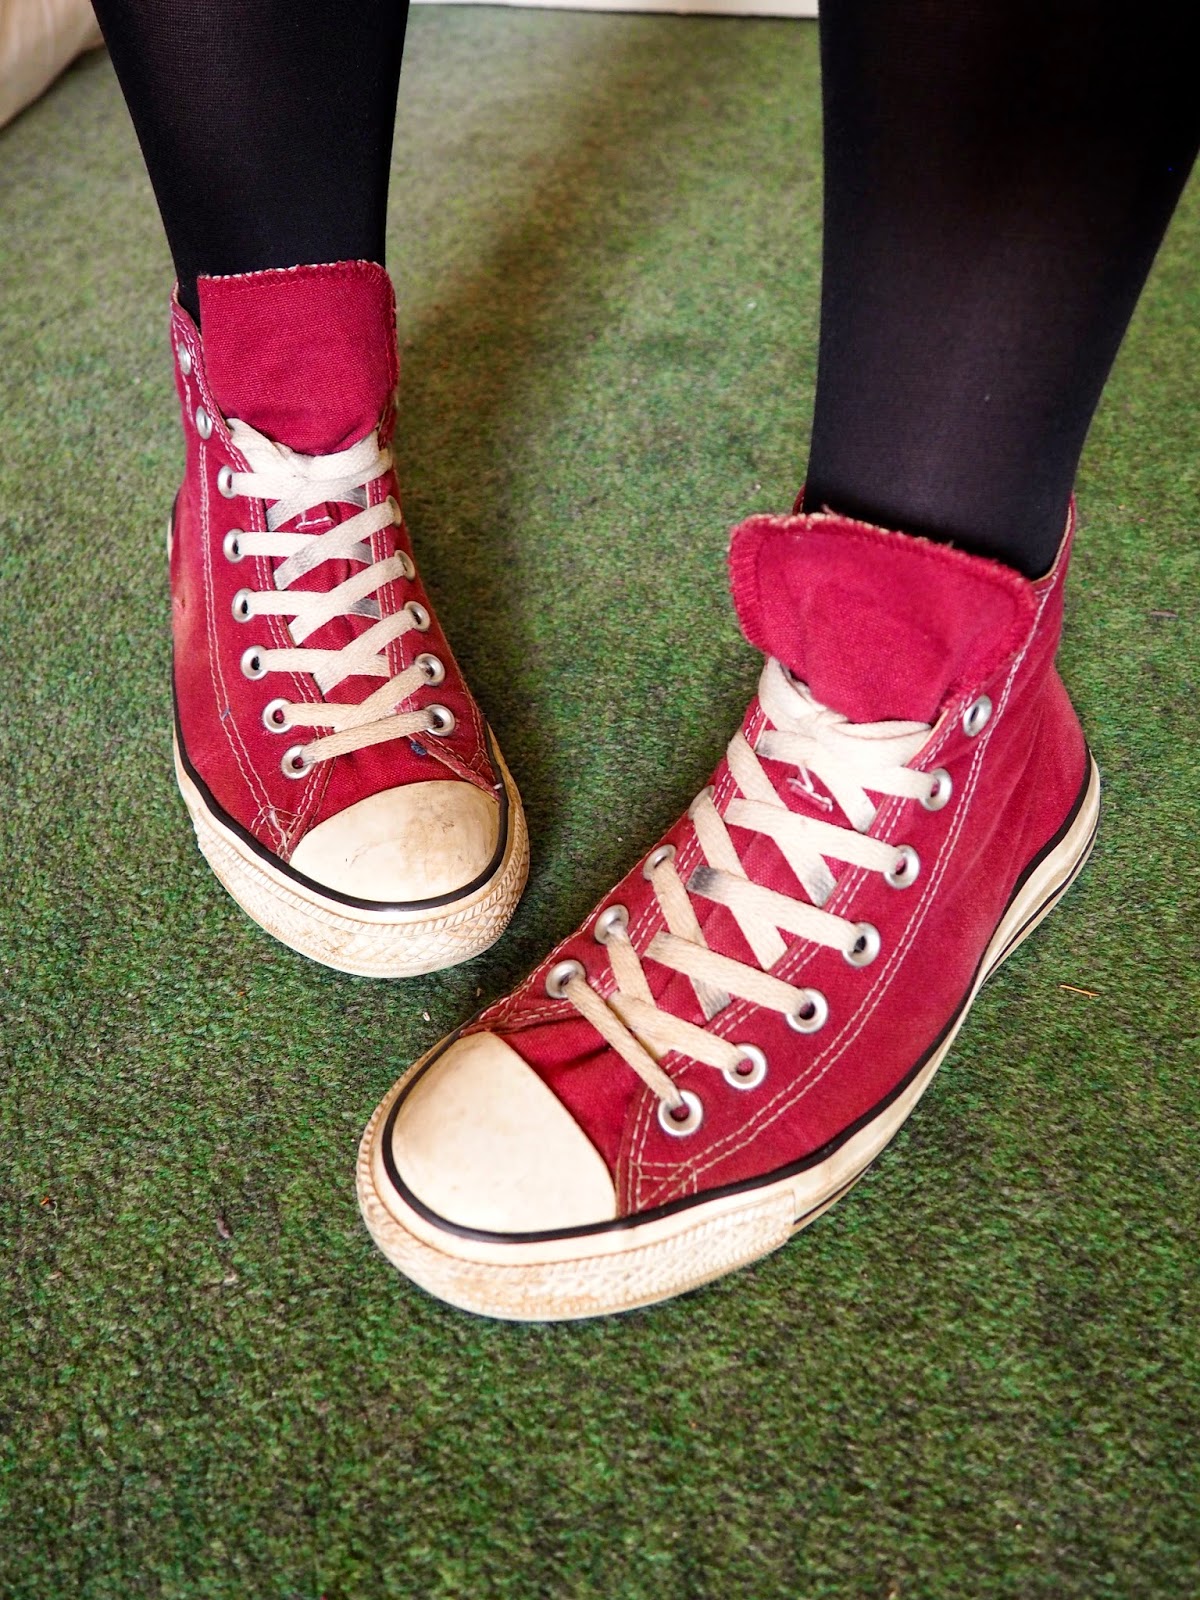 Gig wear outfit details - red burgundy high top Converse sneakers